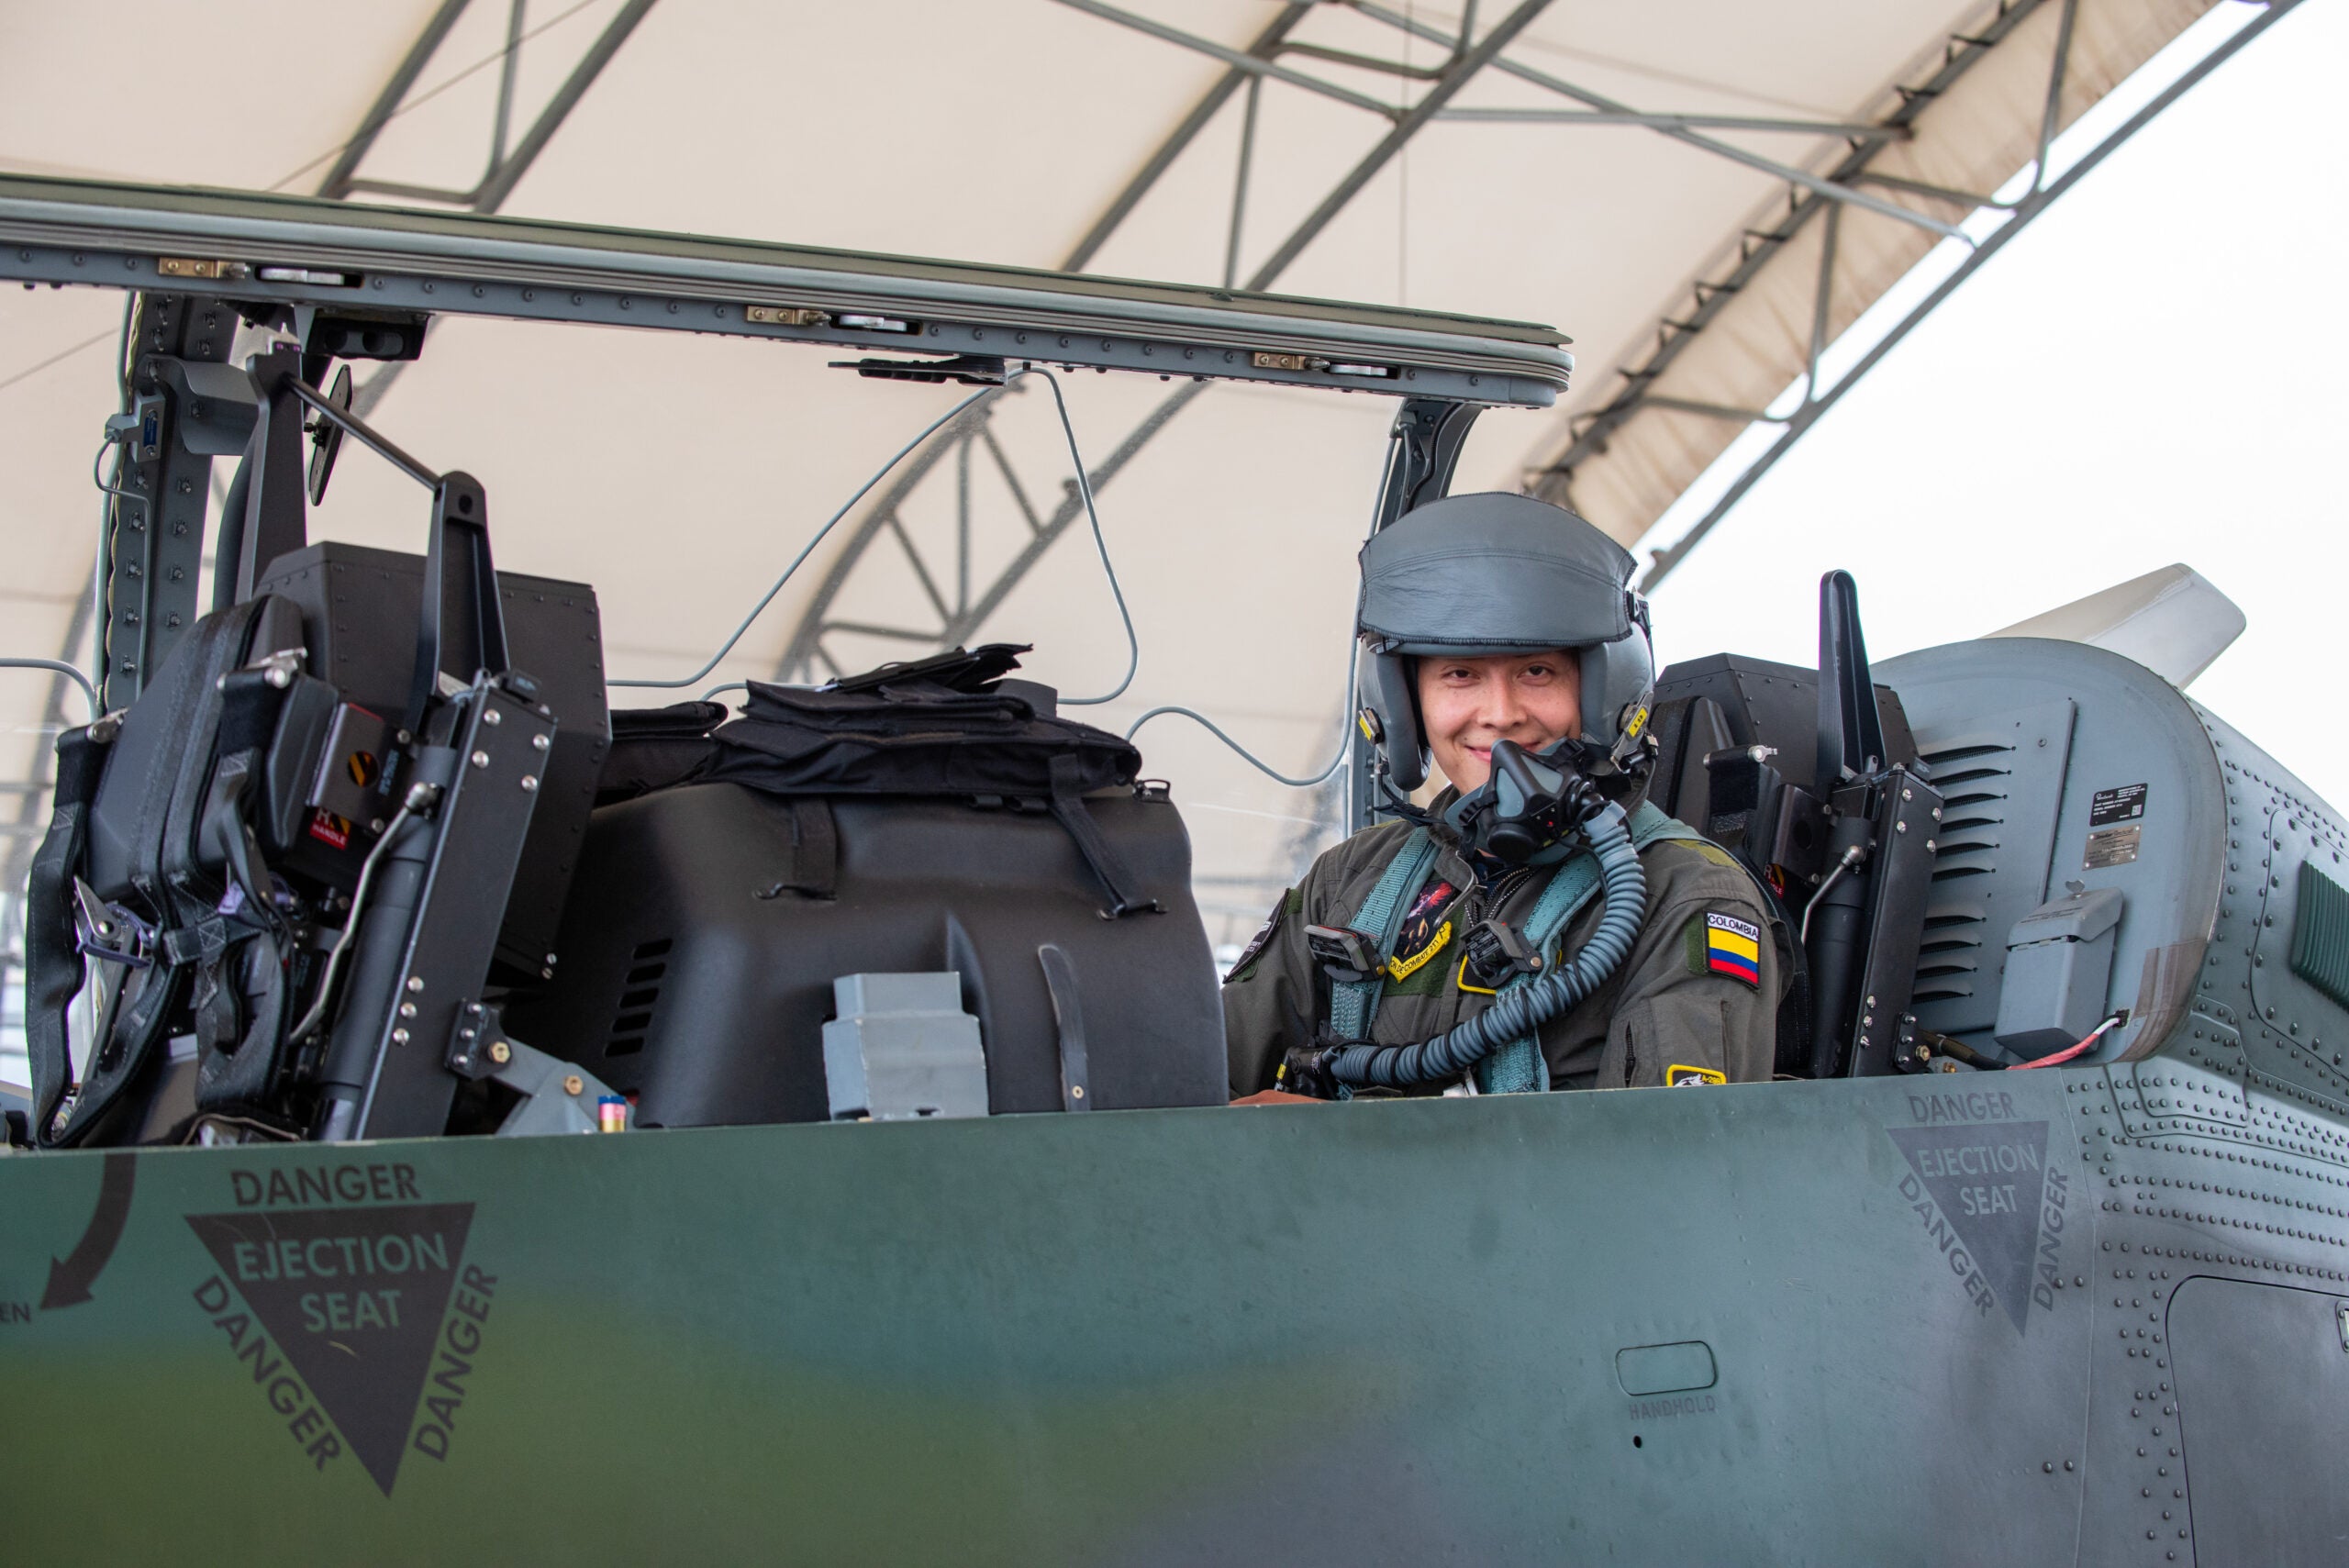 Colombian Air Force Carreno “Tifon”, copilot, poses for a photograph before an experimentation flight in the AT-6E Wolverine at Moody Air Force Base, Georgia, April 14, 2022. The flight focused on digitally tracking friendly forces and potential enemy movement using Airborne Extensible Relay Over-Horizon Network software.  (U.S. Air Force photo by Airman 1st Class Courtney Sebastianelli)